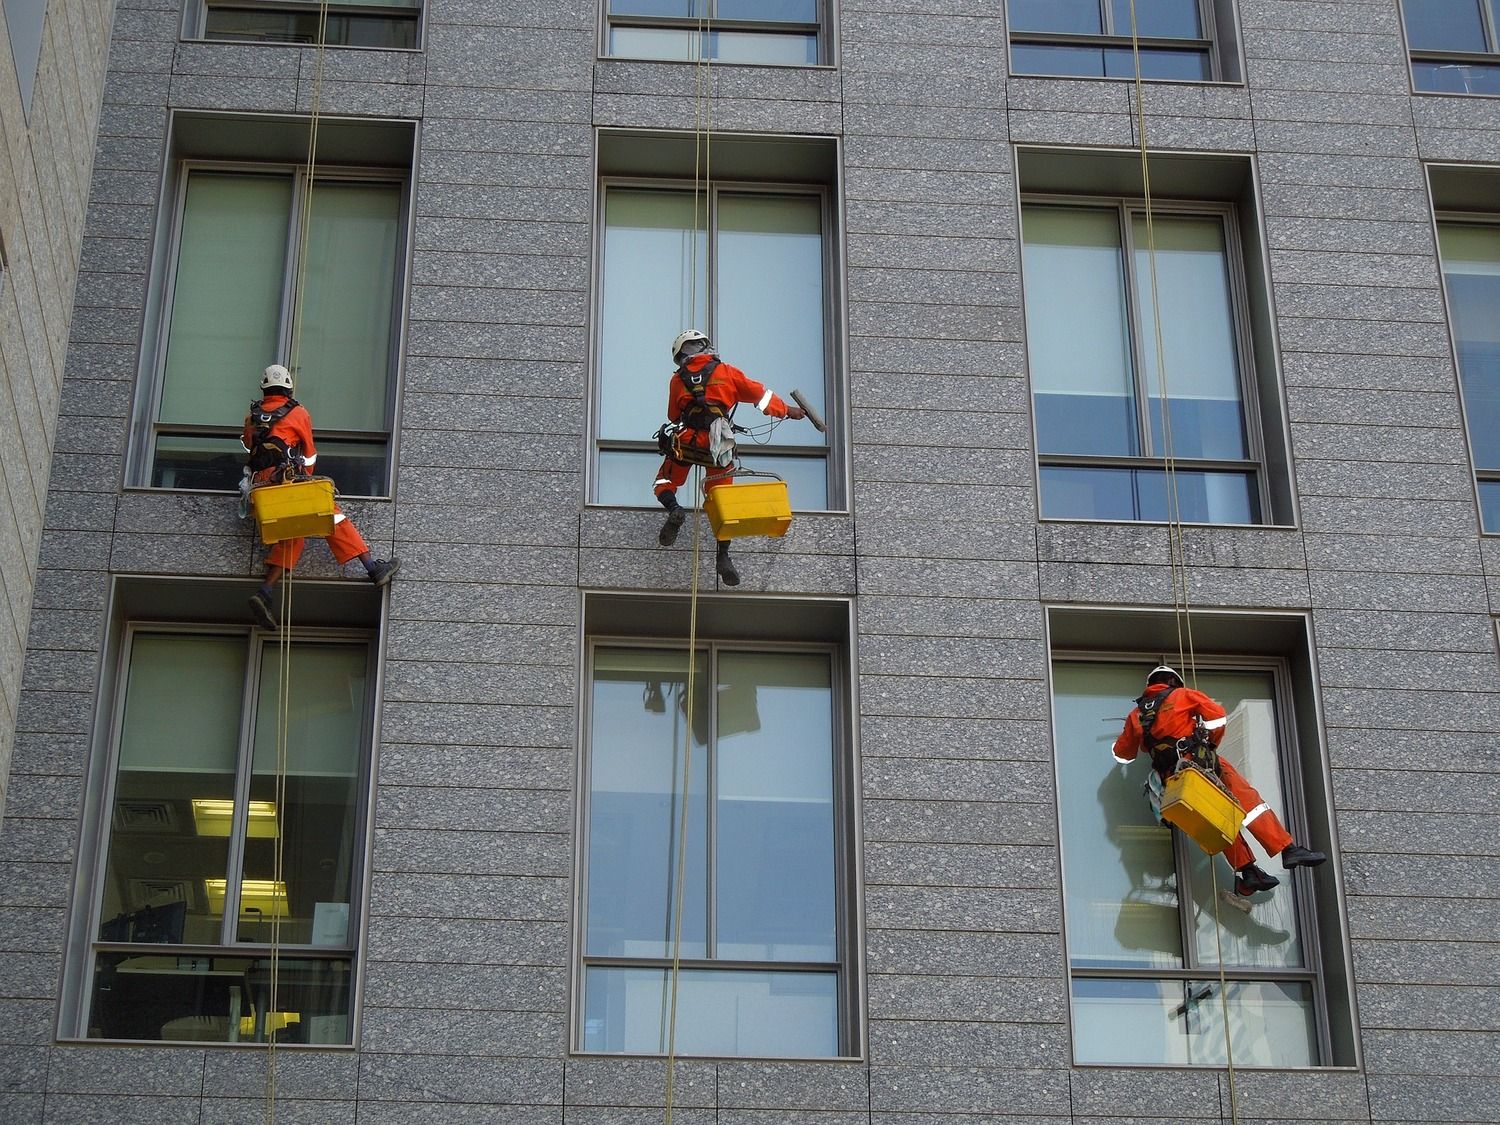 Rope access technicians cleaning the windows of a high rise building.